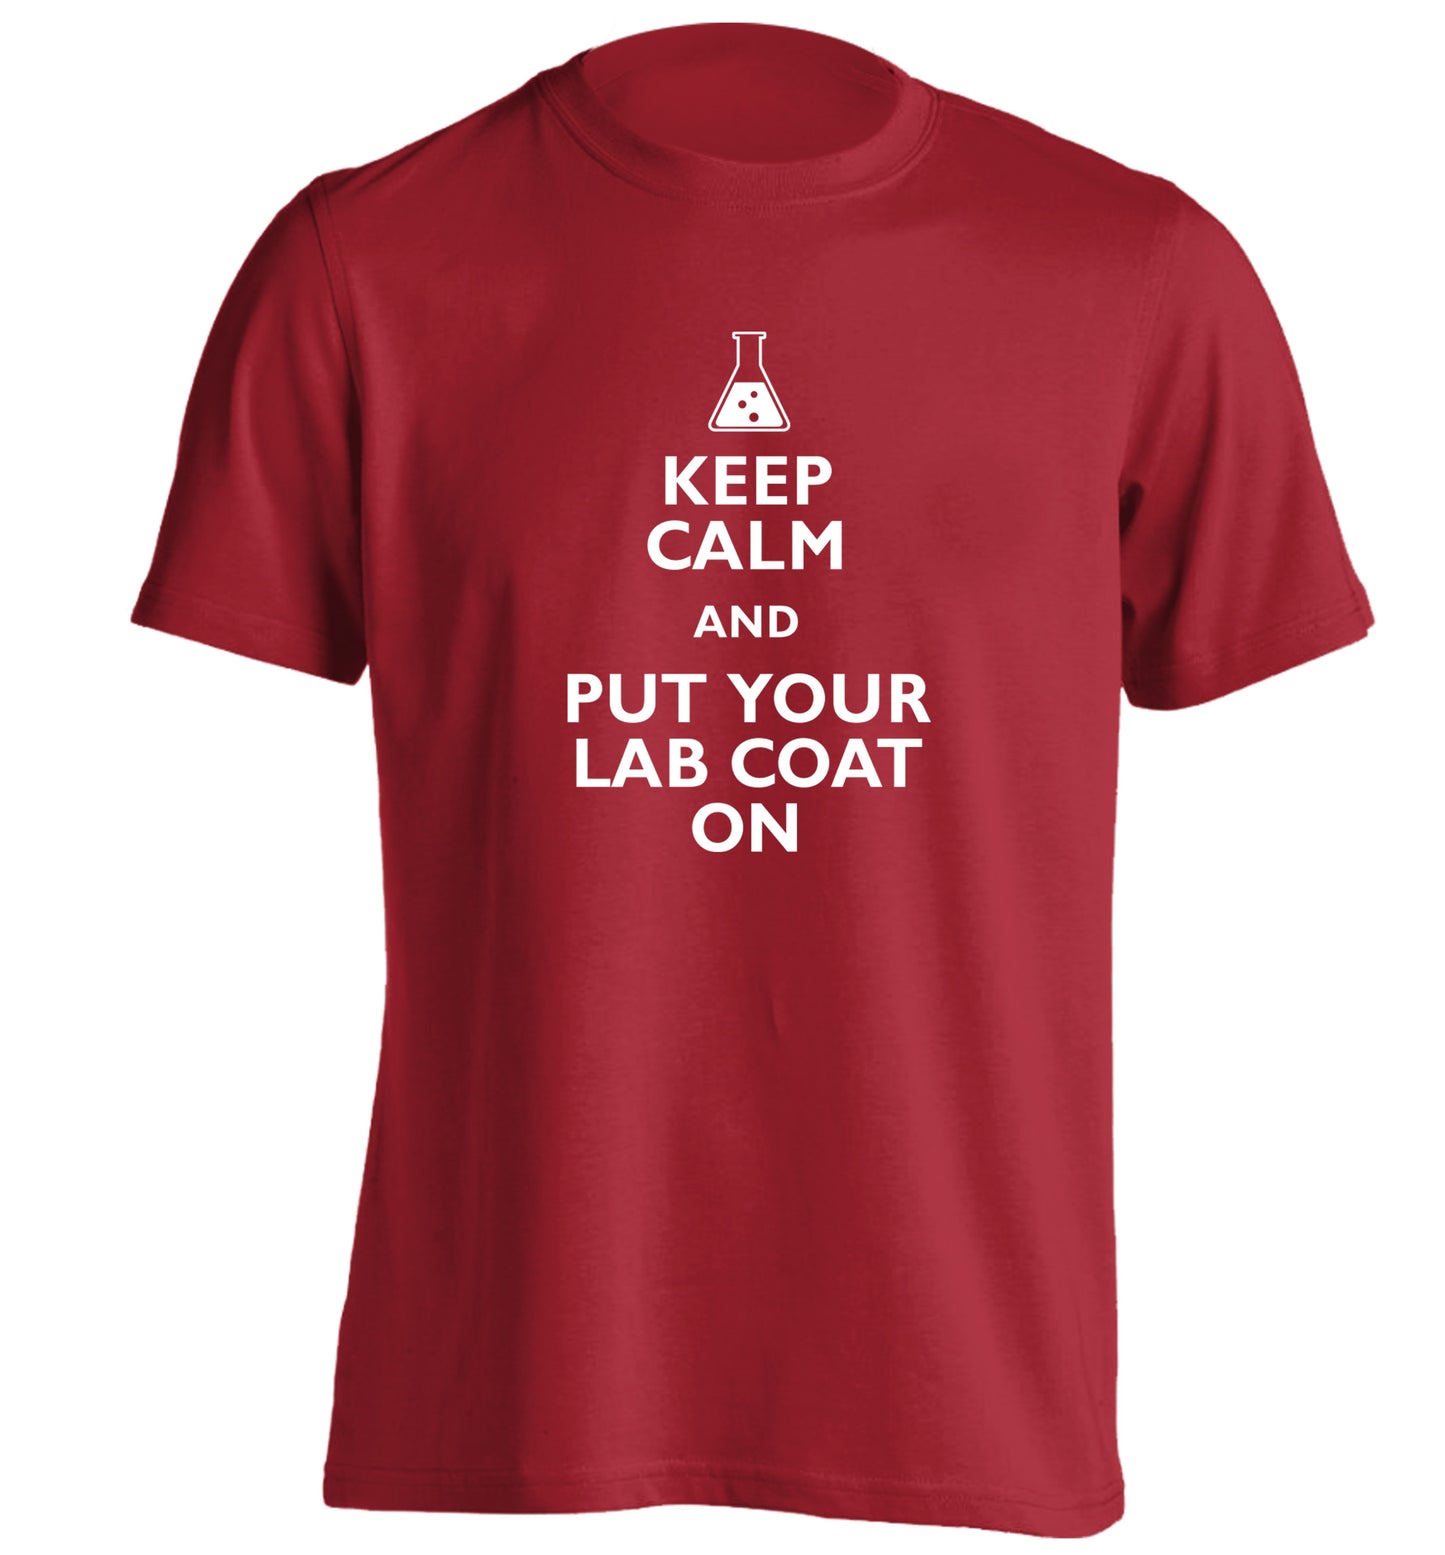 Keep calm and put your lab coat on adults unisex red Tshirt 2XL